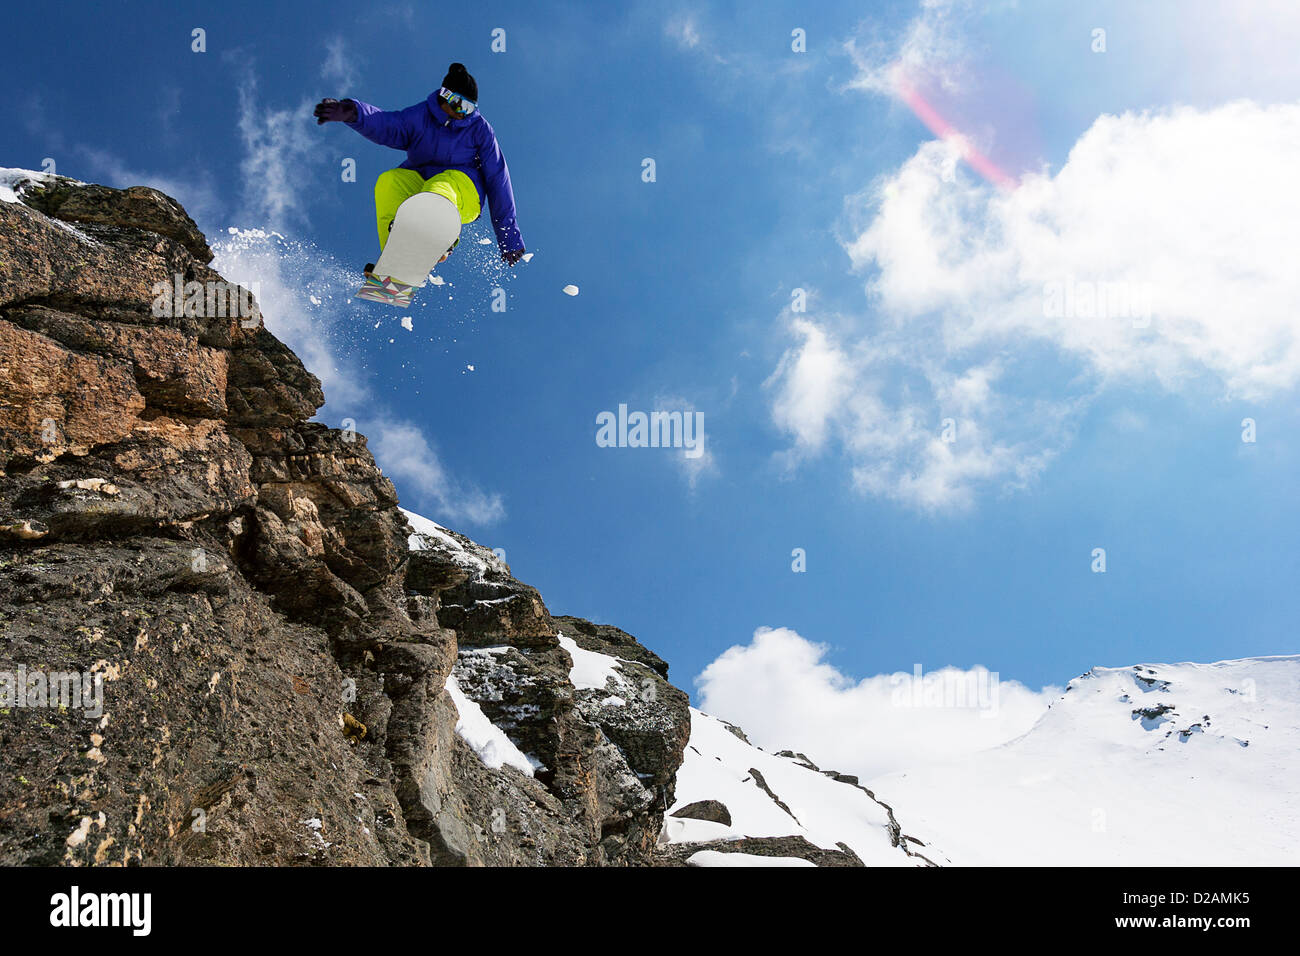 Snowboarder jumping on rocky slope Stock Photo